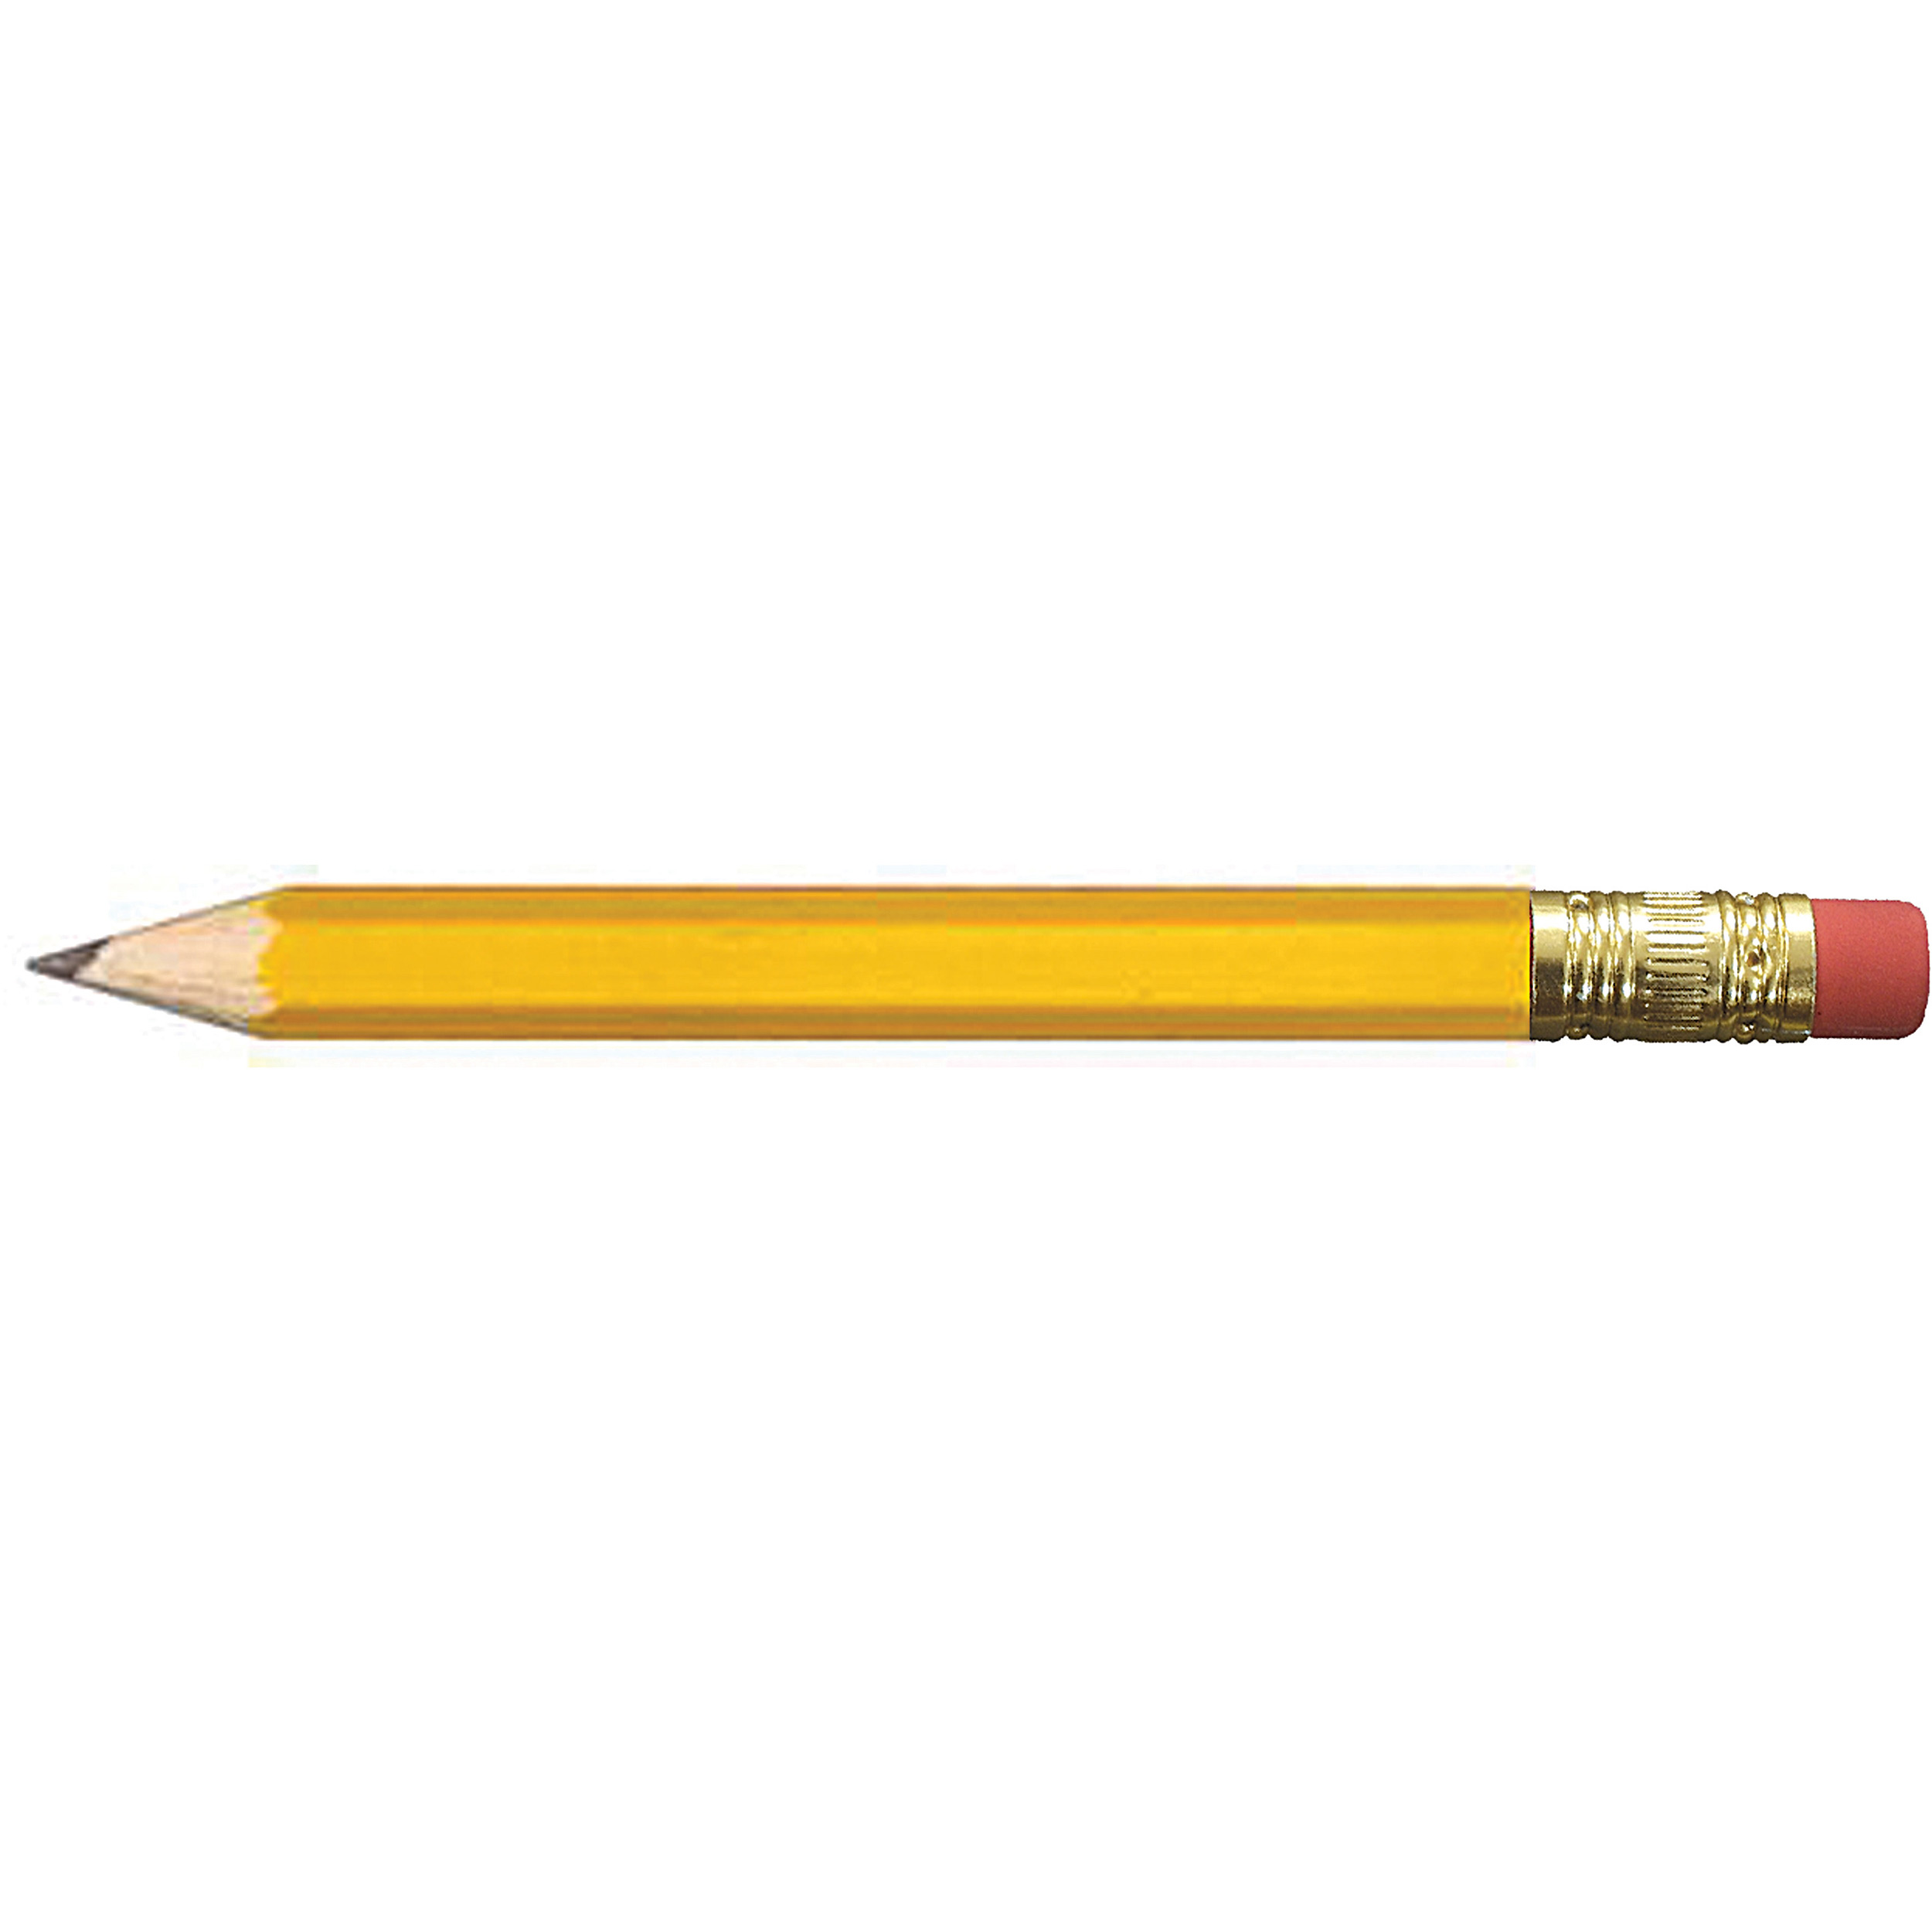 Free Pencil, Download Free Clip Art, Free Clip Art on